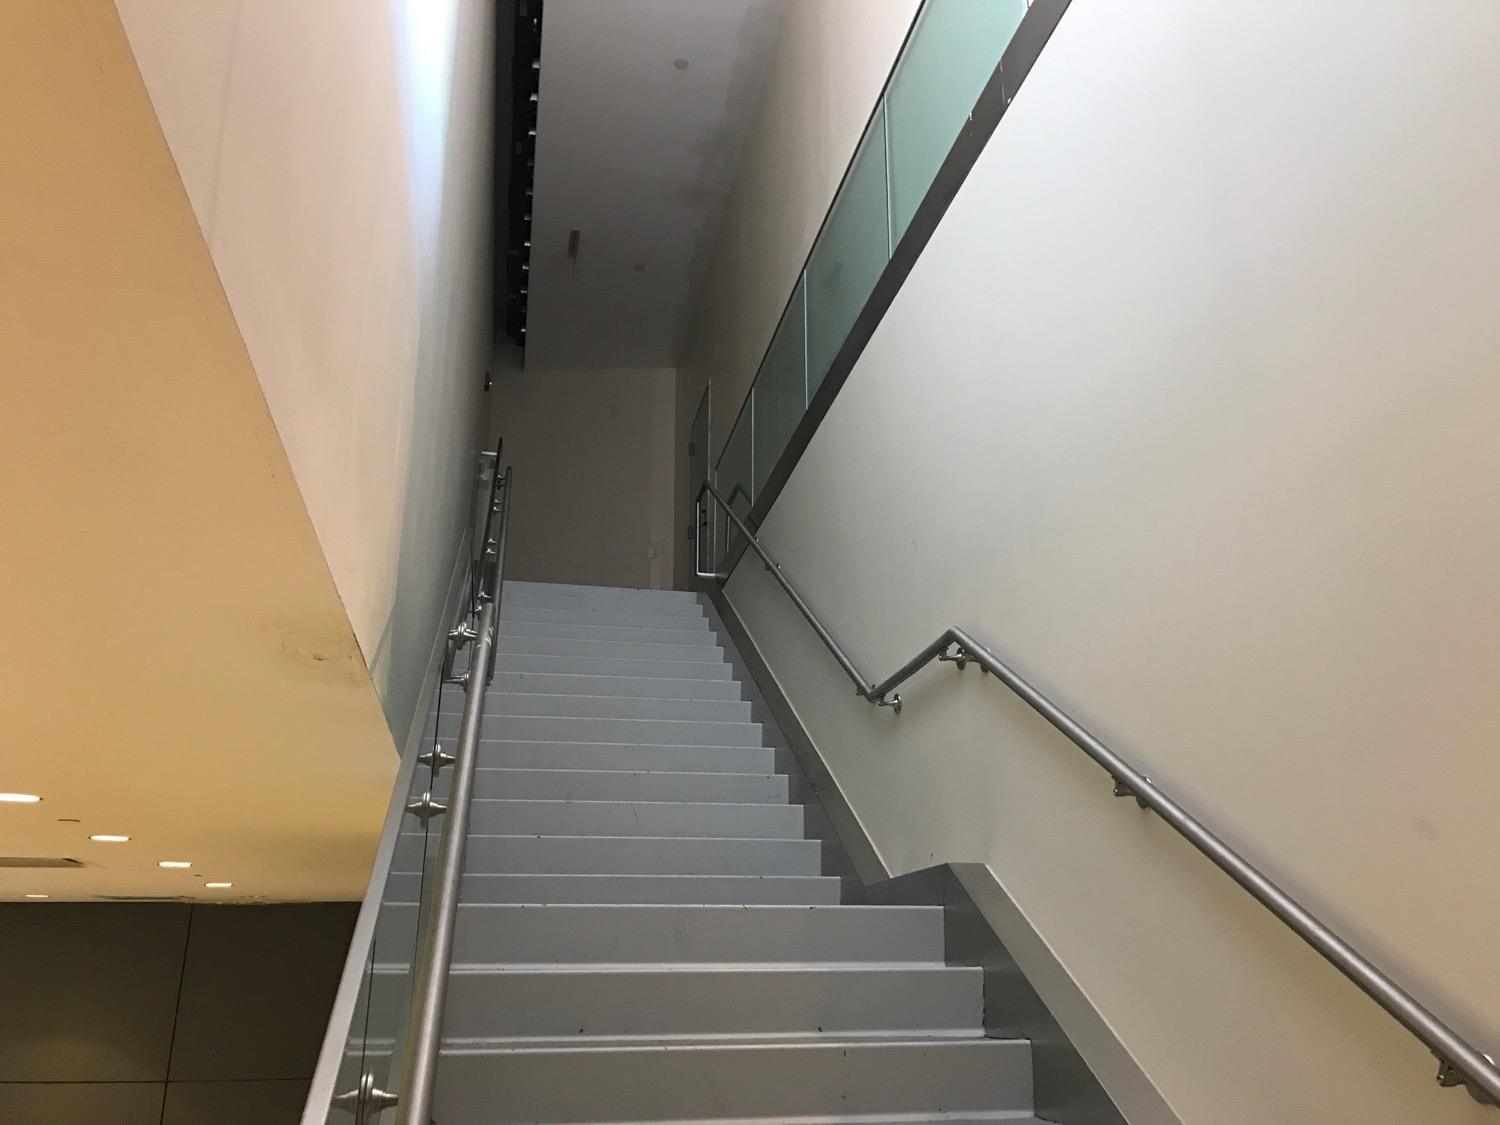 a staircase with handrails in a building